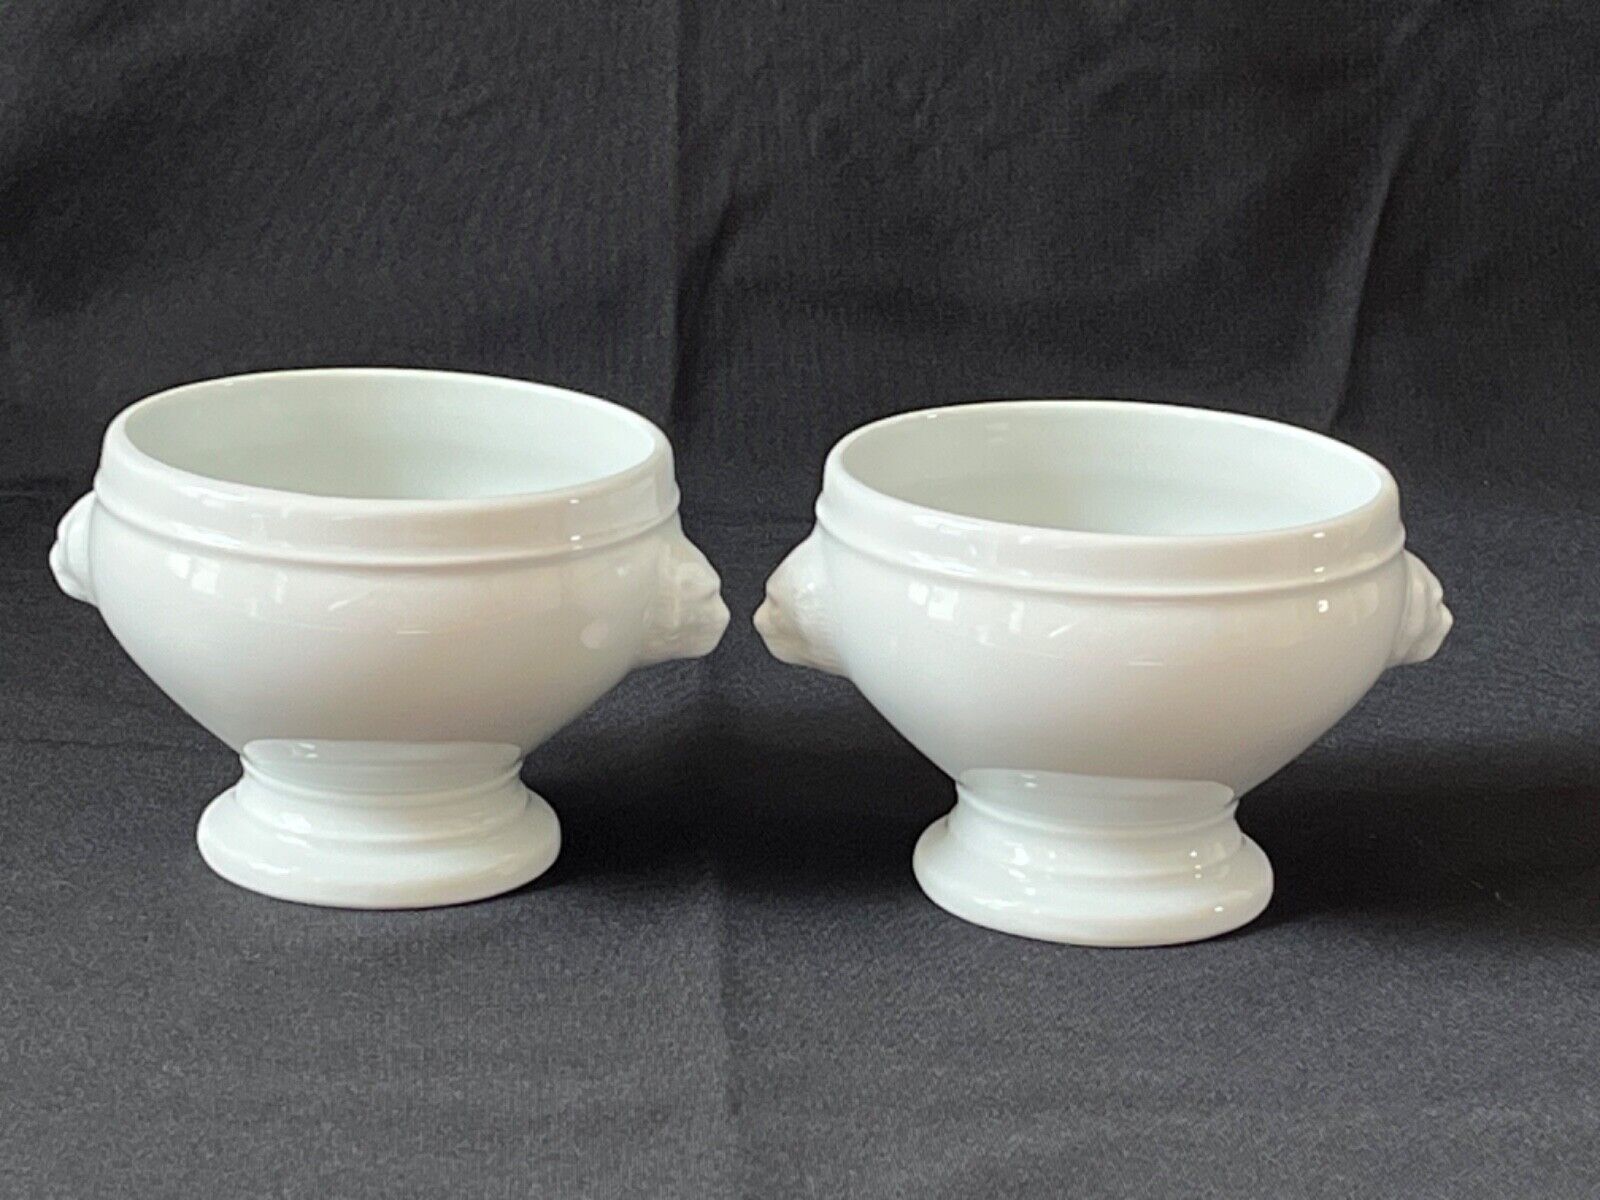 2 APILCO Lions Head Bowl 5 7/8” Footed White French Porcelain Soup/Serving Bowls